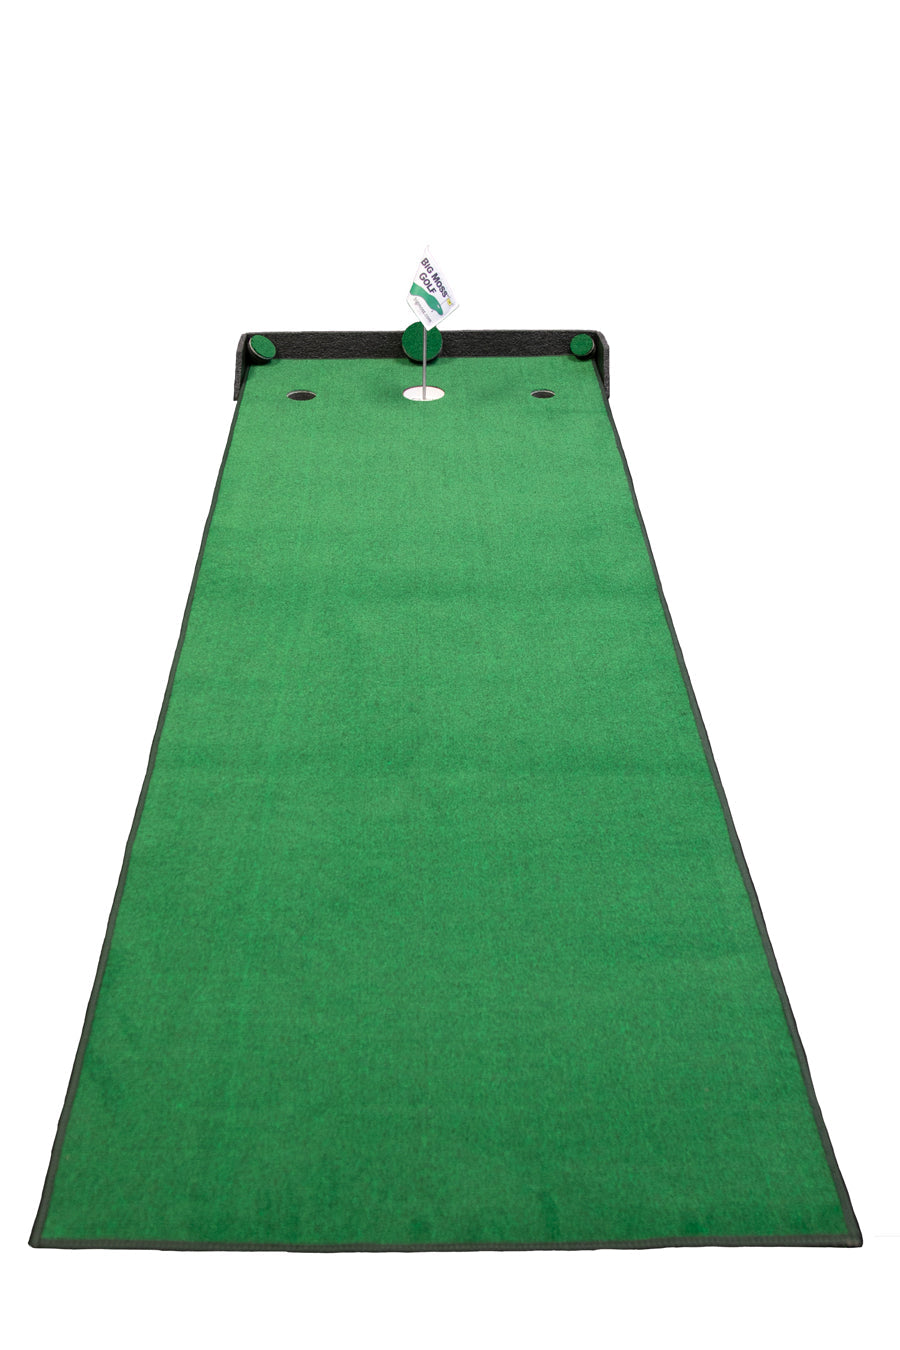 Big Moss Competitor PRO Putting Green